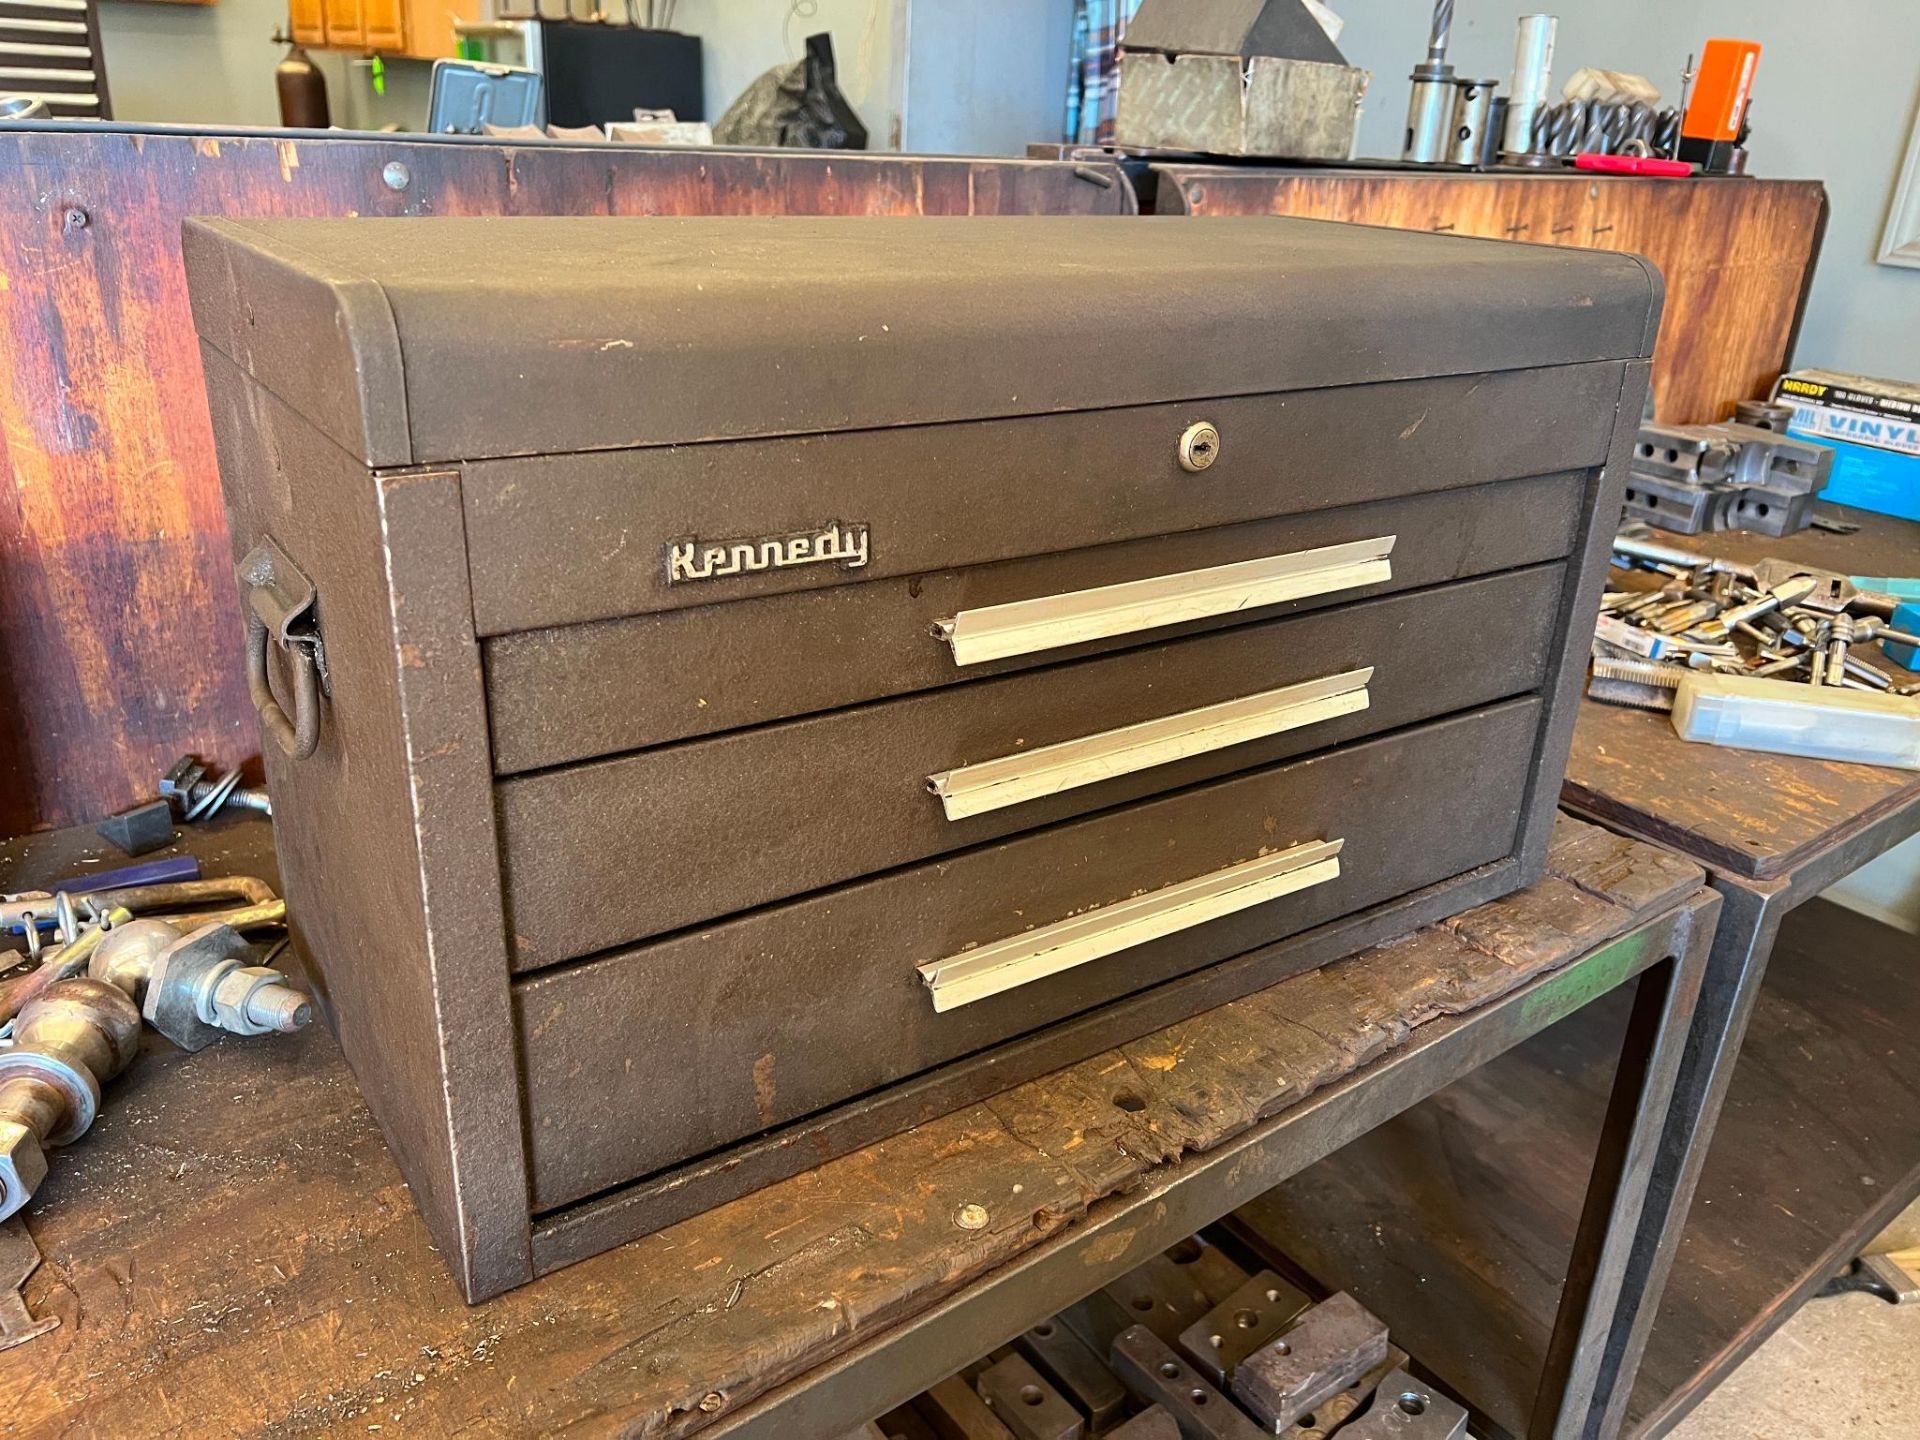 Kennedy Model 263-015030 3-Drawer Mechanics Chest (toolbox) with ALL CONTENTS. to include: Hand tool